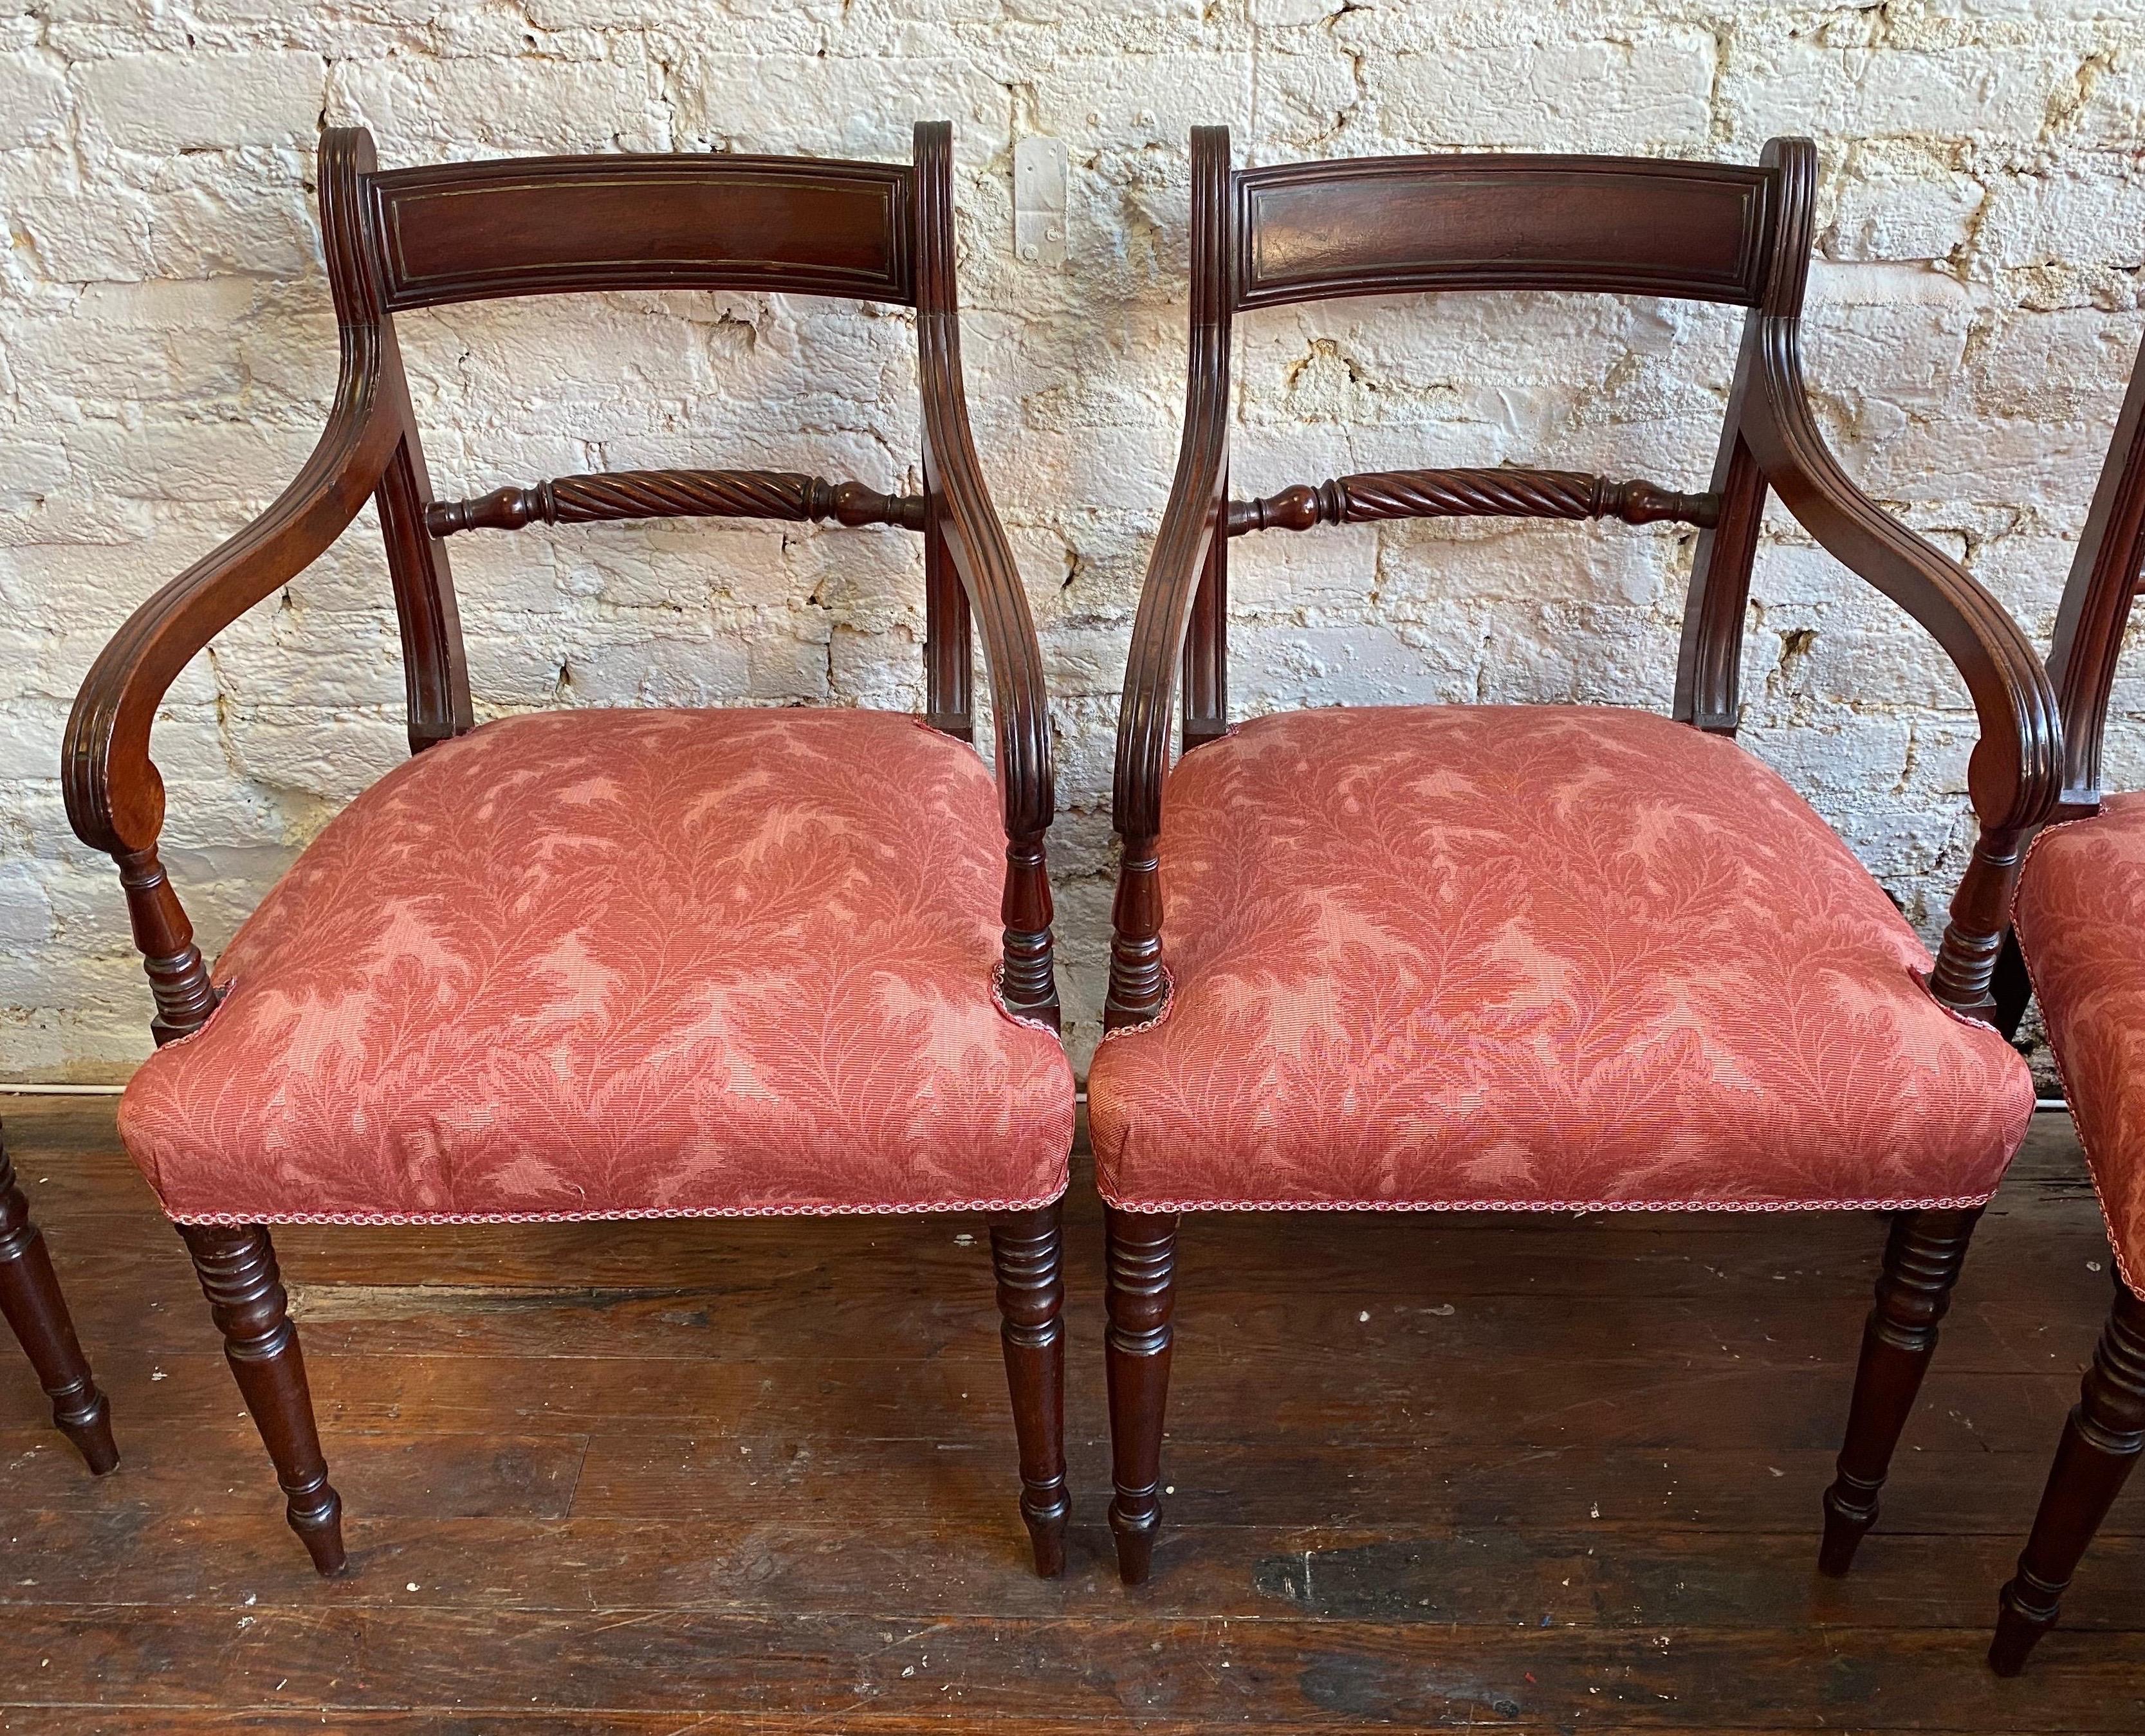 Great set of 12 periods 19th century English Regency mahogany dining chairs in an attractive upholstery. Chairs are hand carved mahogany with brass inlaid in to the backs.

10 side chairs measuring 34